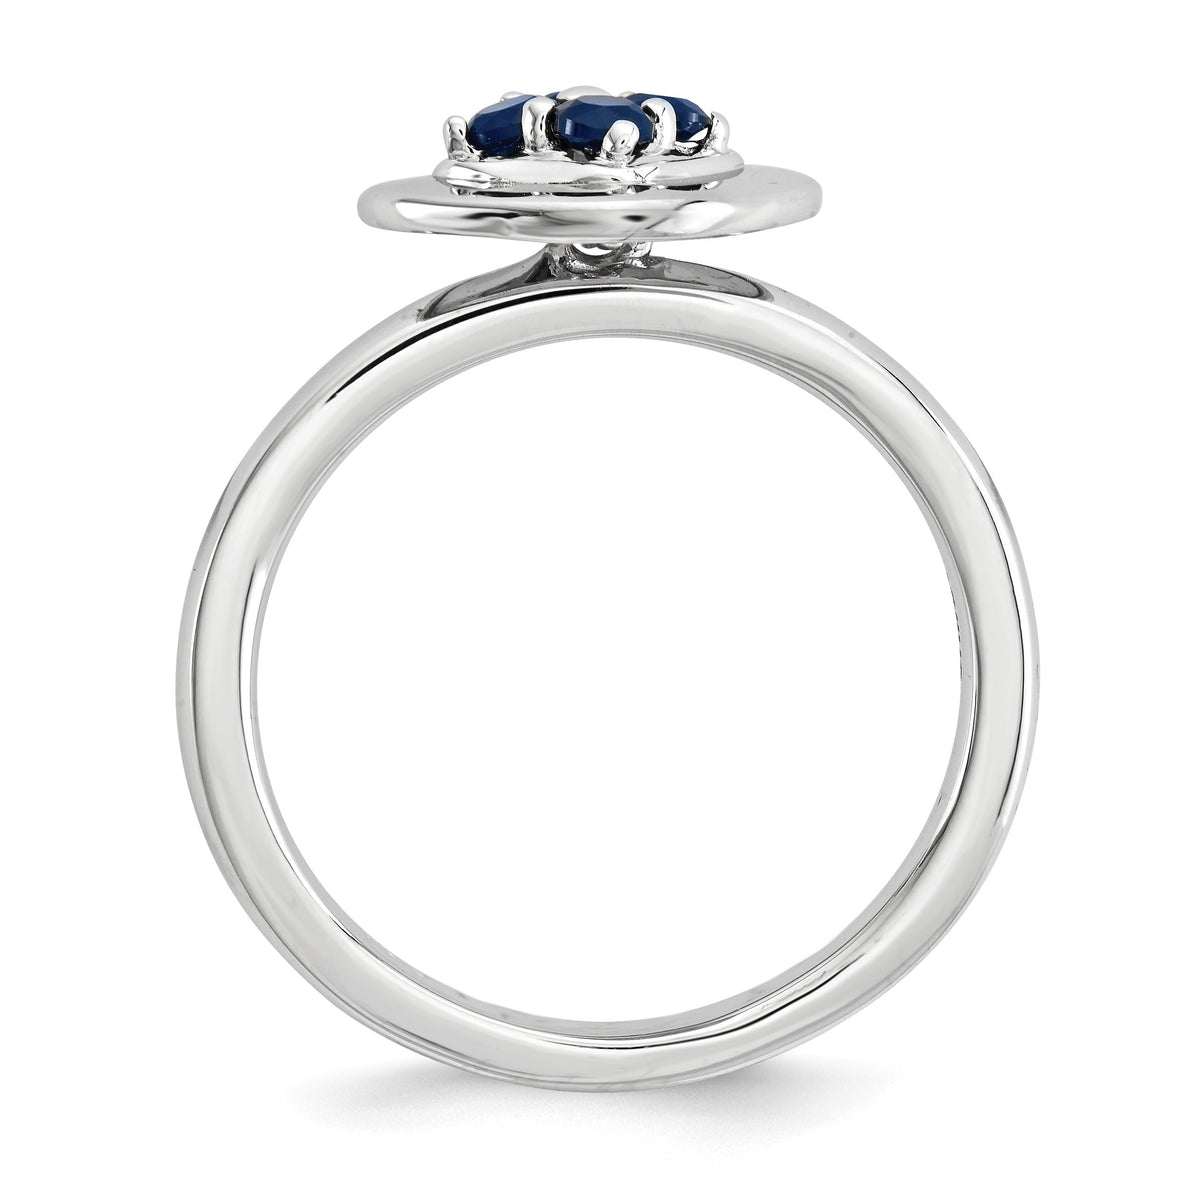 Alternate view of the Silver Stackable Created Sapphire Ring by The Black Bow Jewelry Co.